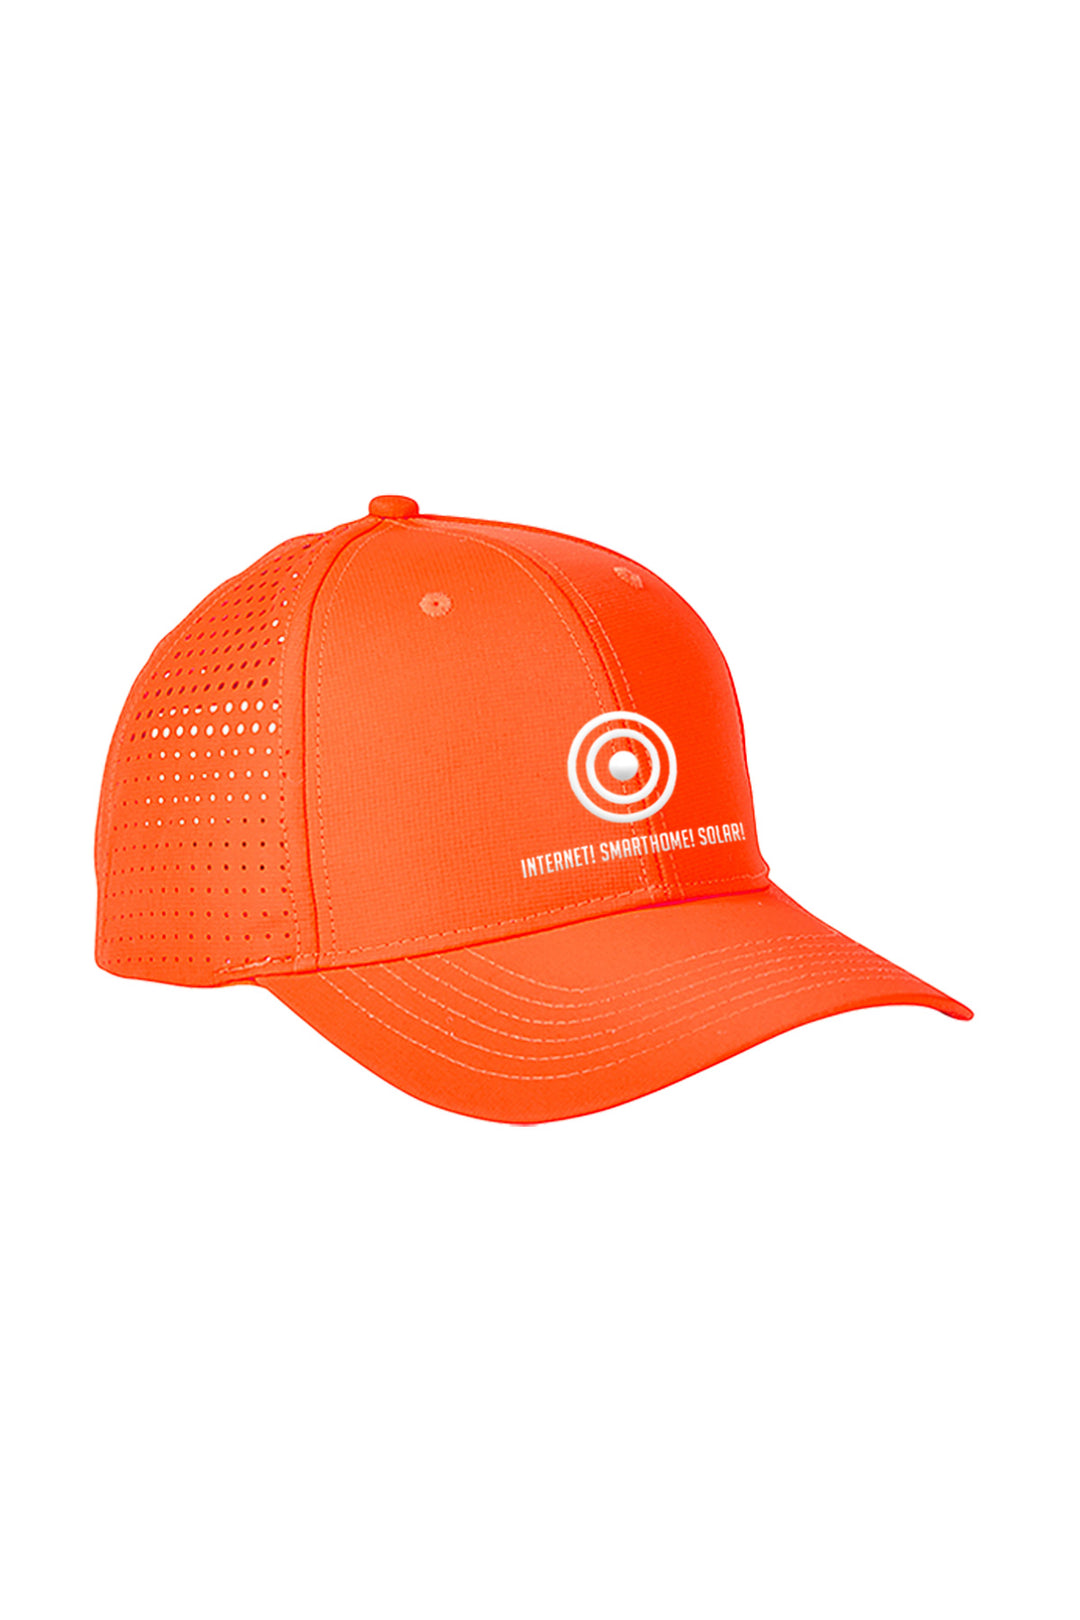 Performance Perforated Cap - 3D Puff